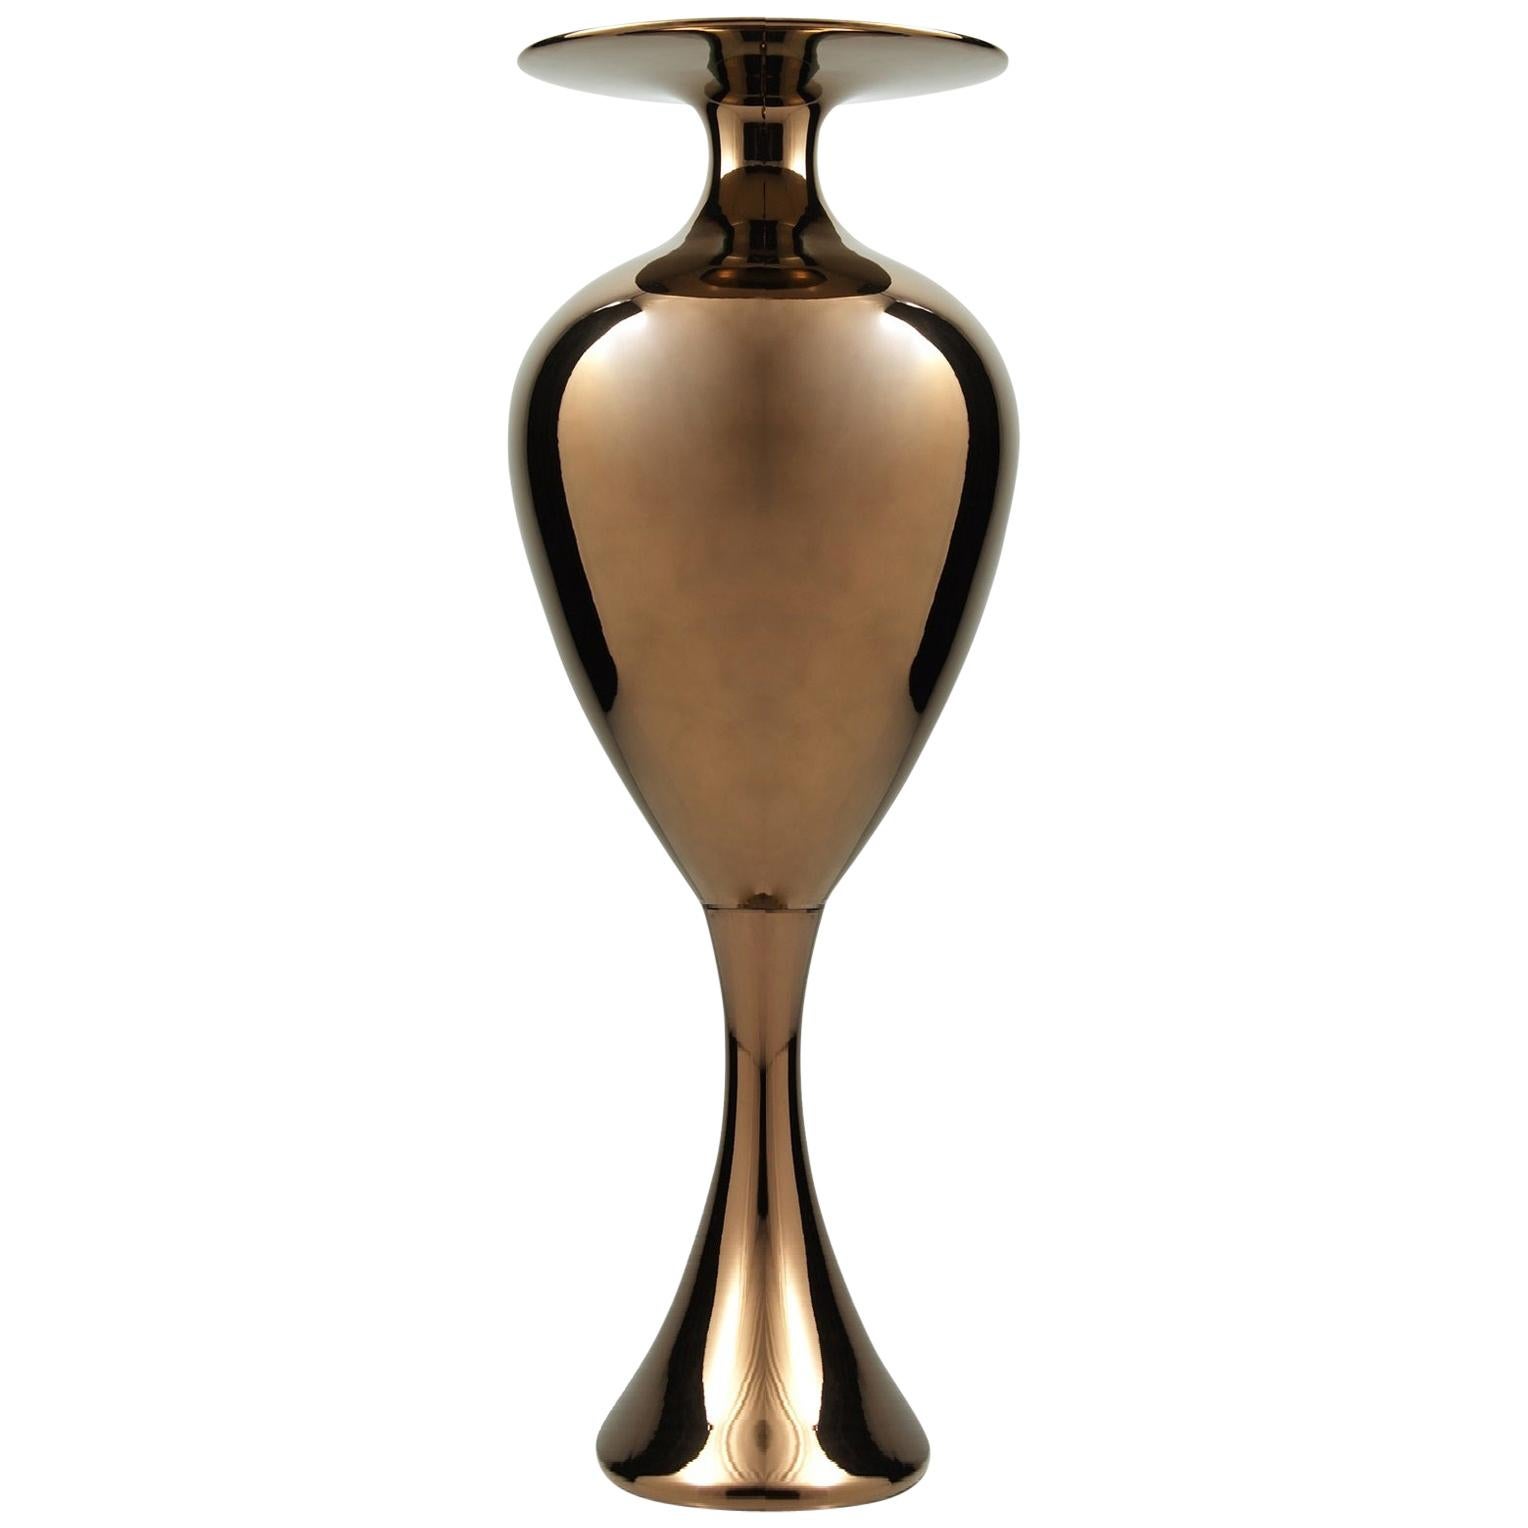 Ceramic Vase "CAMILLE-L" Handcrafted in Bronze by Gabriella B. Made in Italy